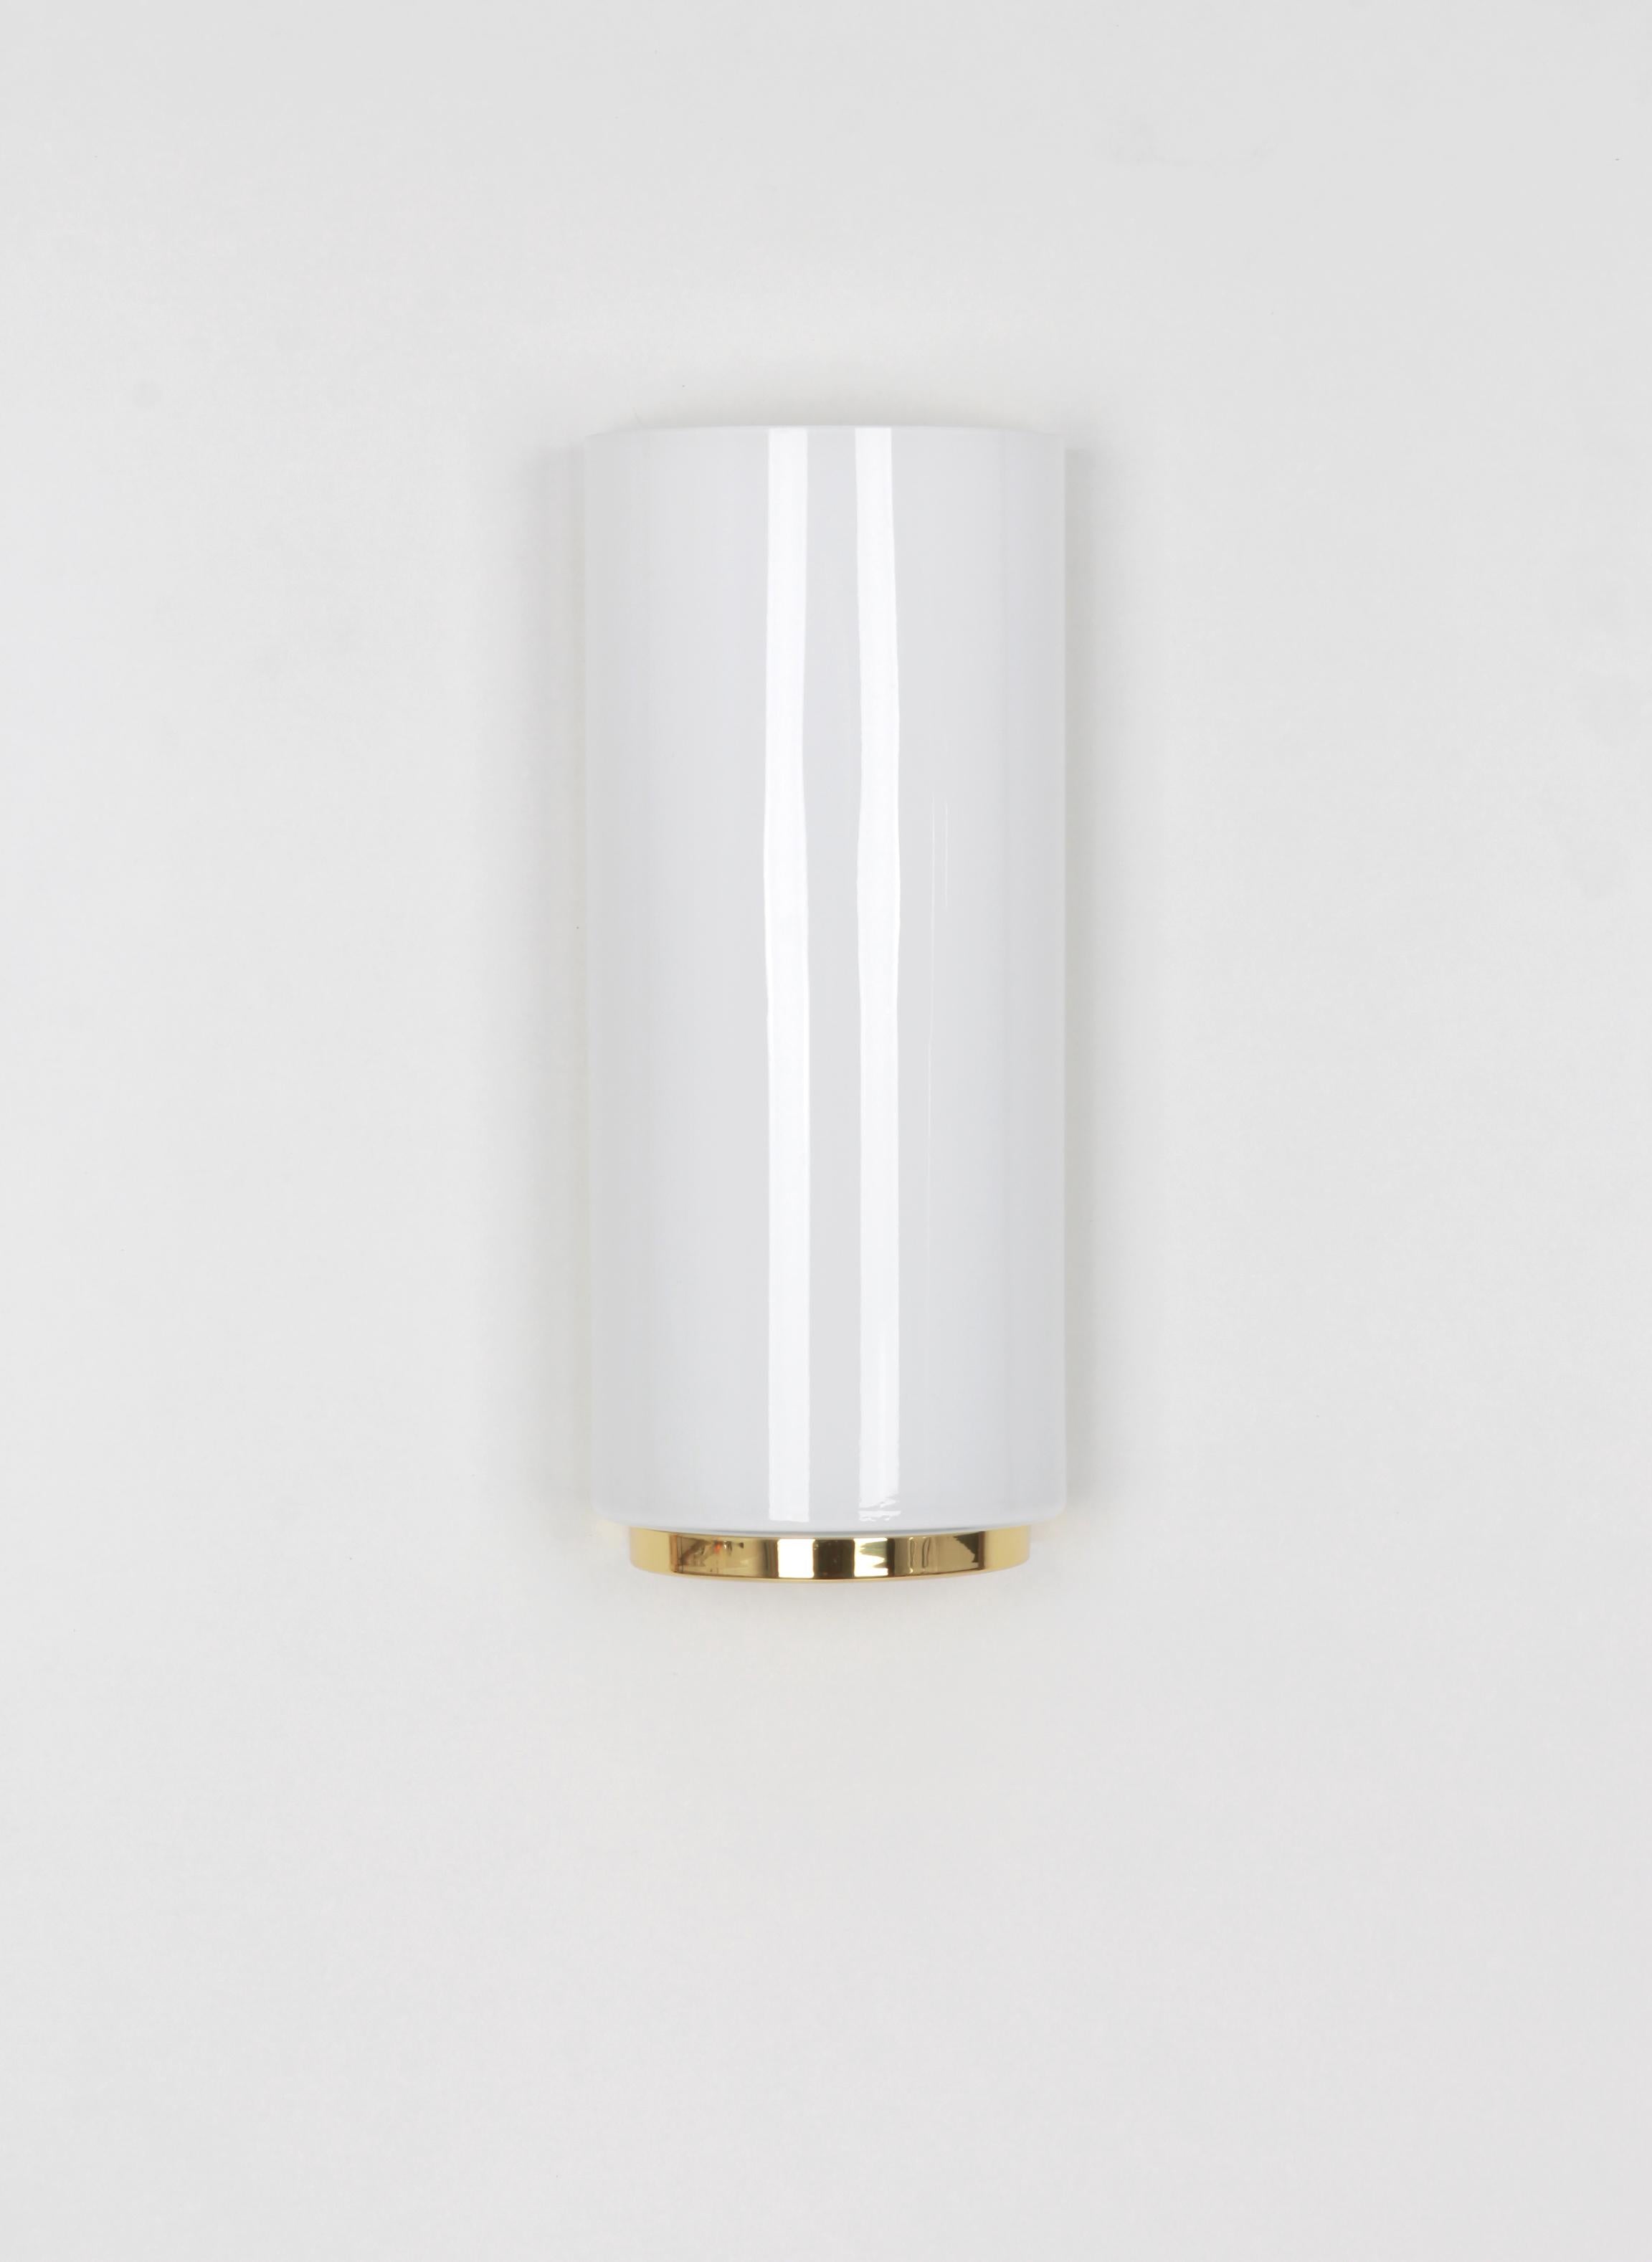 Stunning single opal white glass sconce made by Limburg on a brass frame.
Best of the 1970s from Germany

The price is for 1 wall light.
Only one item is still available.

Very good condition, with small signs of age and use on the base.